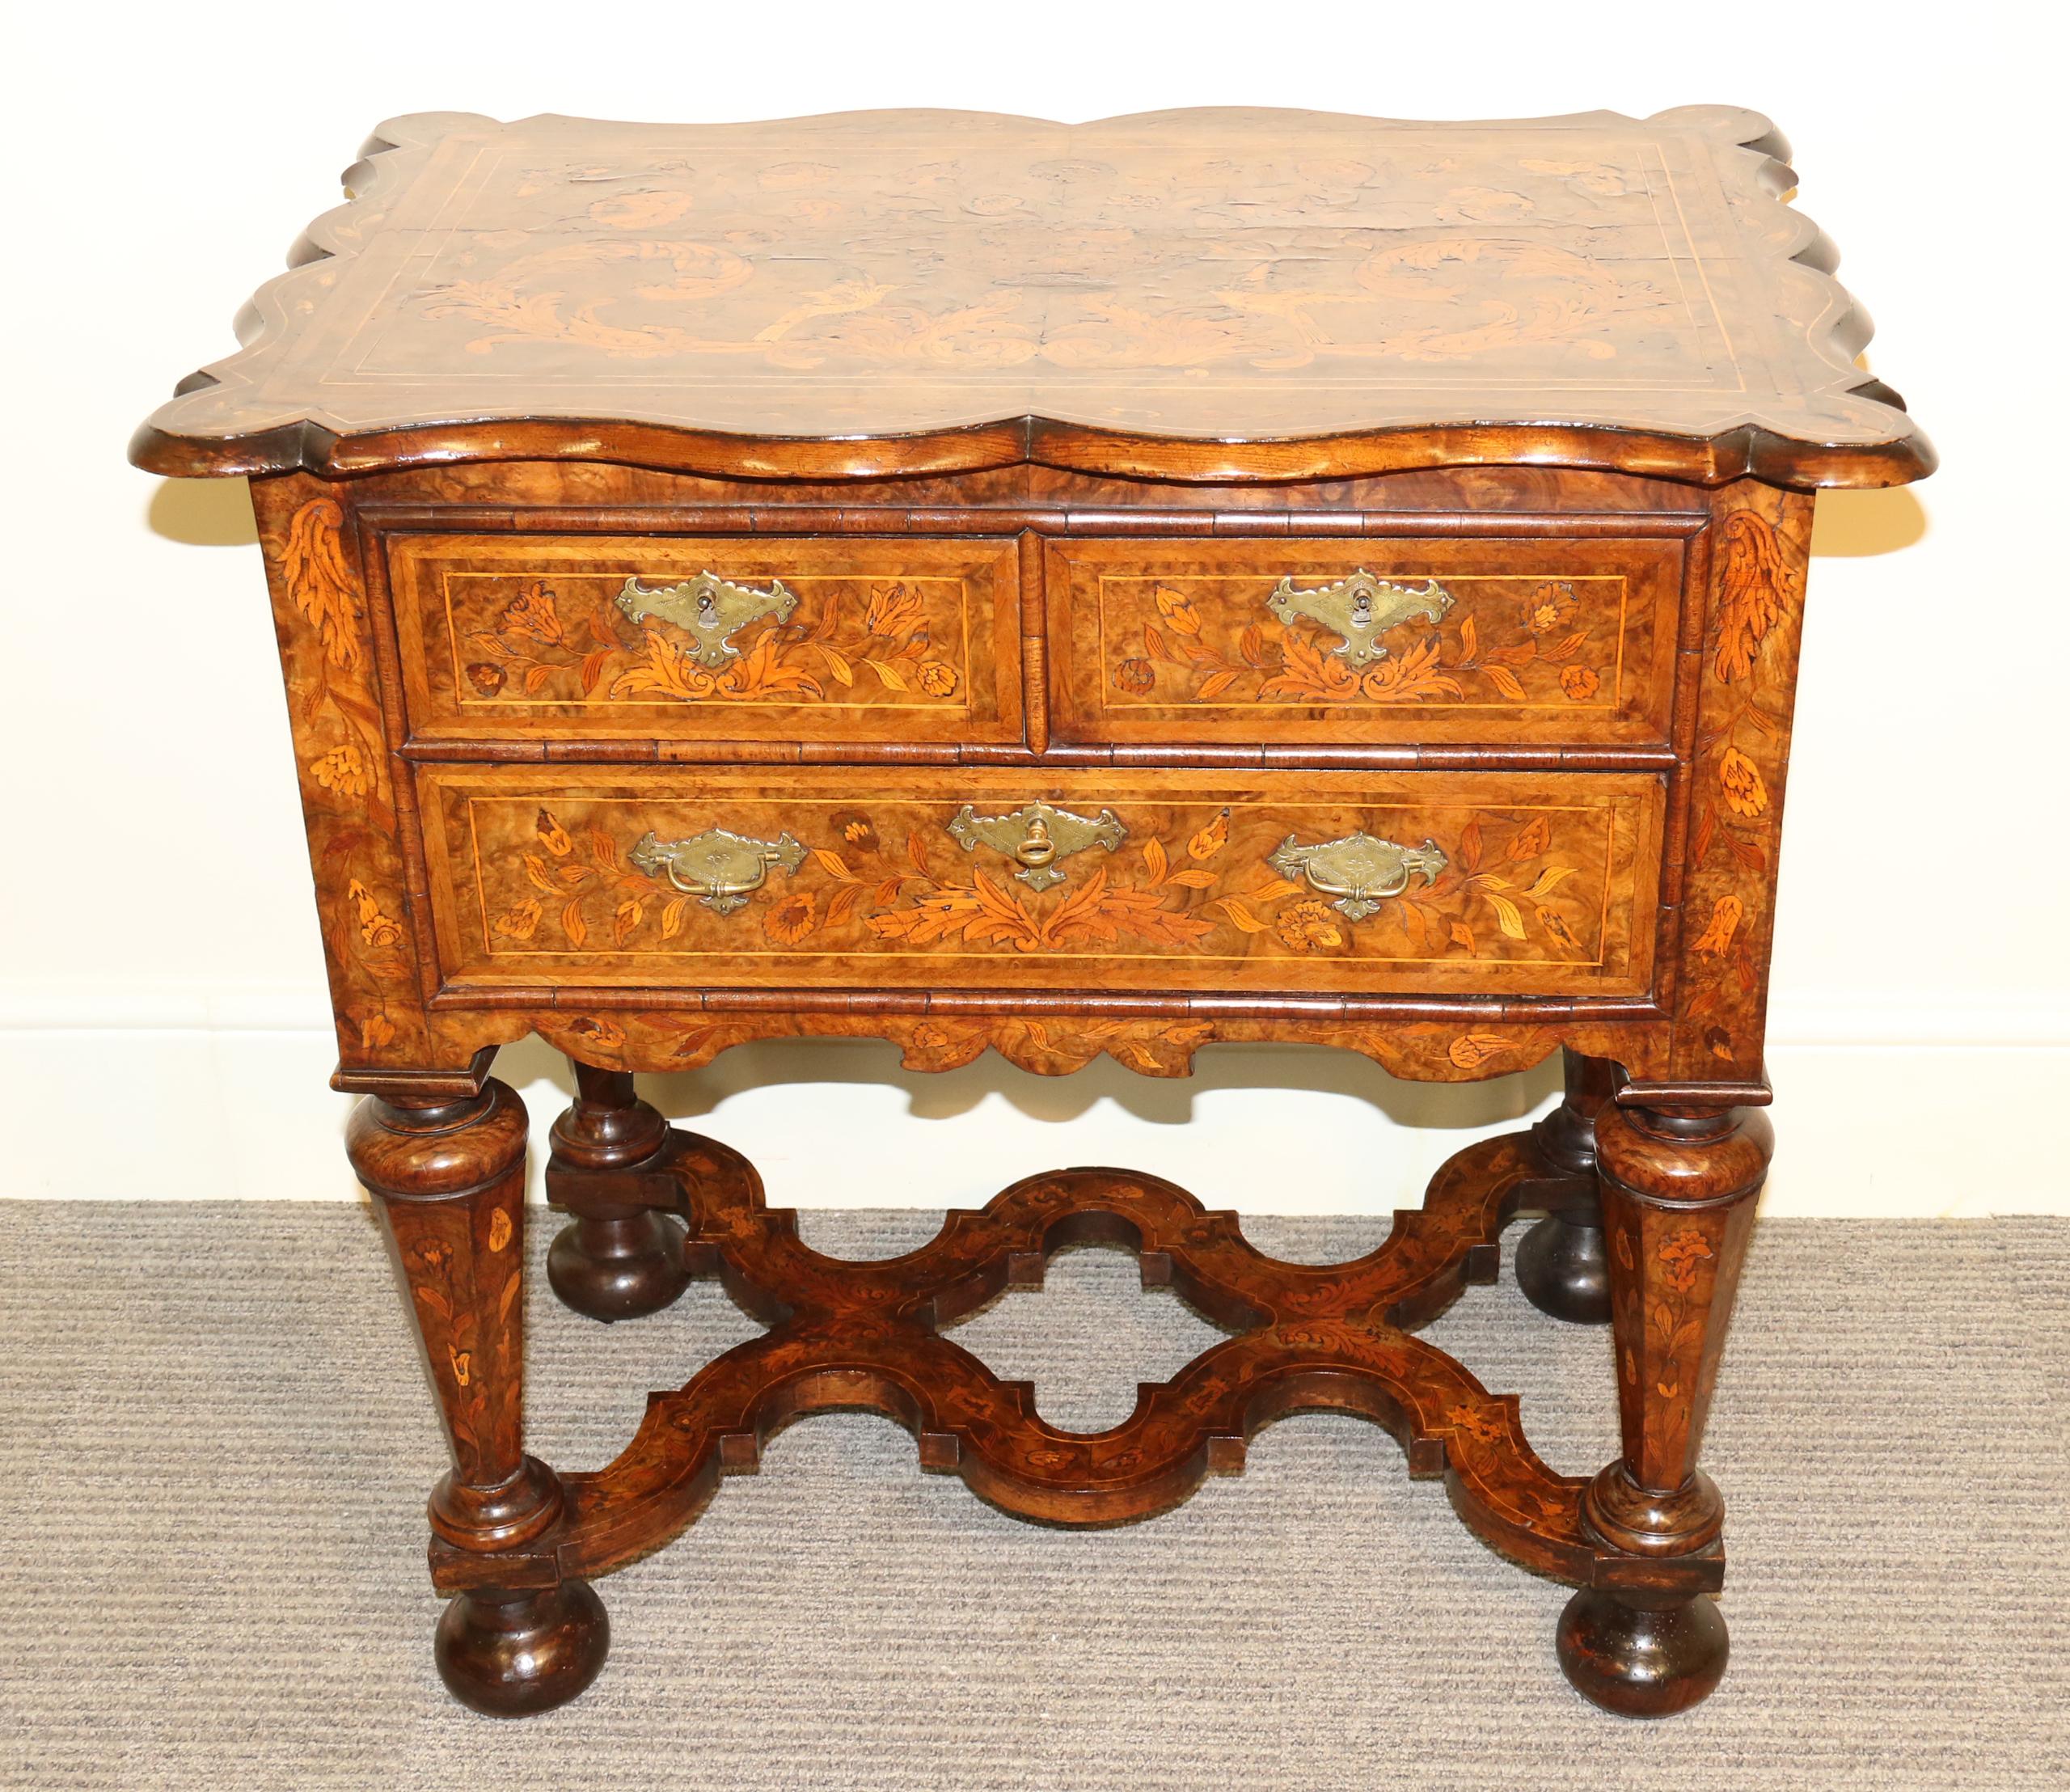 A mid-18th century Dutch burr walnut and marquetry lowboy. It has thick hand cut veneers with typical designs of birds, foliage and flowers and has original handles and locks to the three drawers. A rare feature of this lowboy is that it doubles as